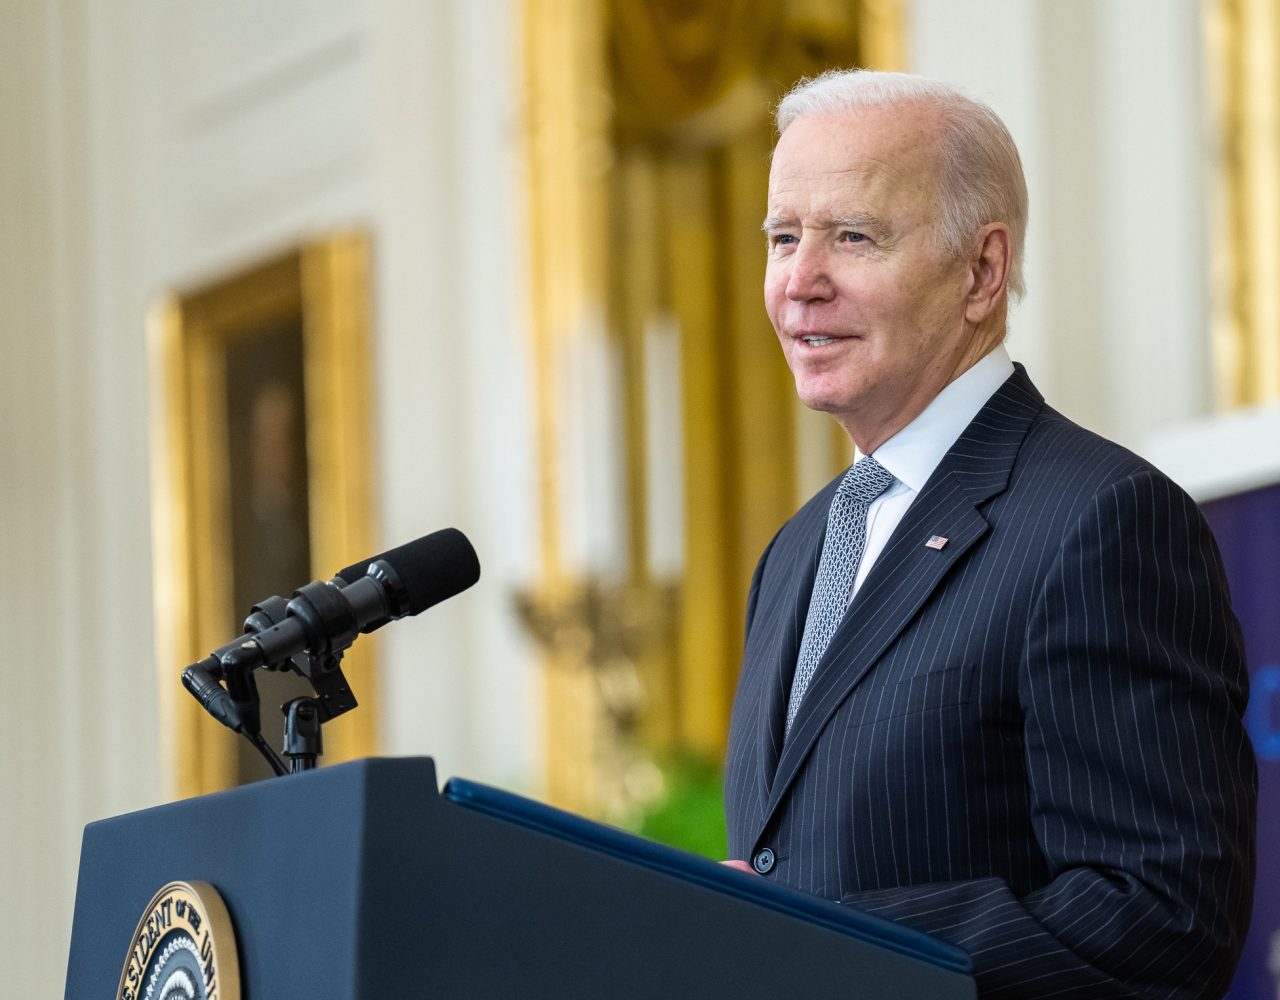 Joe Biden: Today, we are taking another important step forward in ending cancer as we know it.